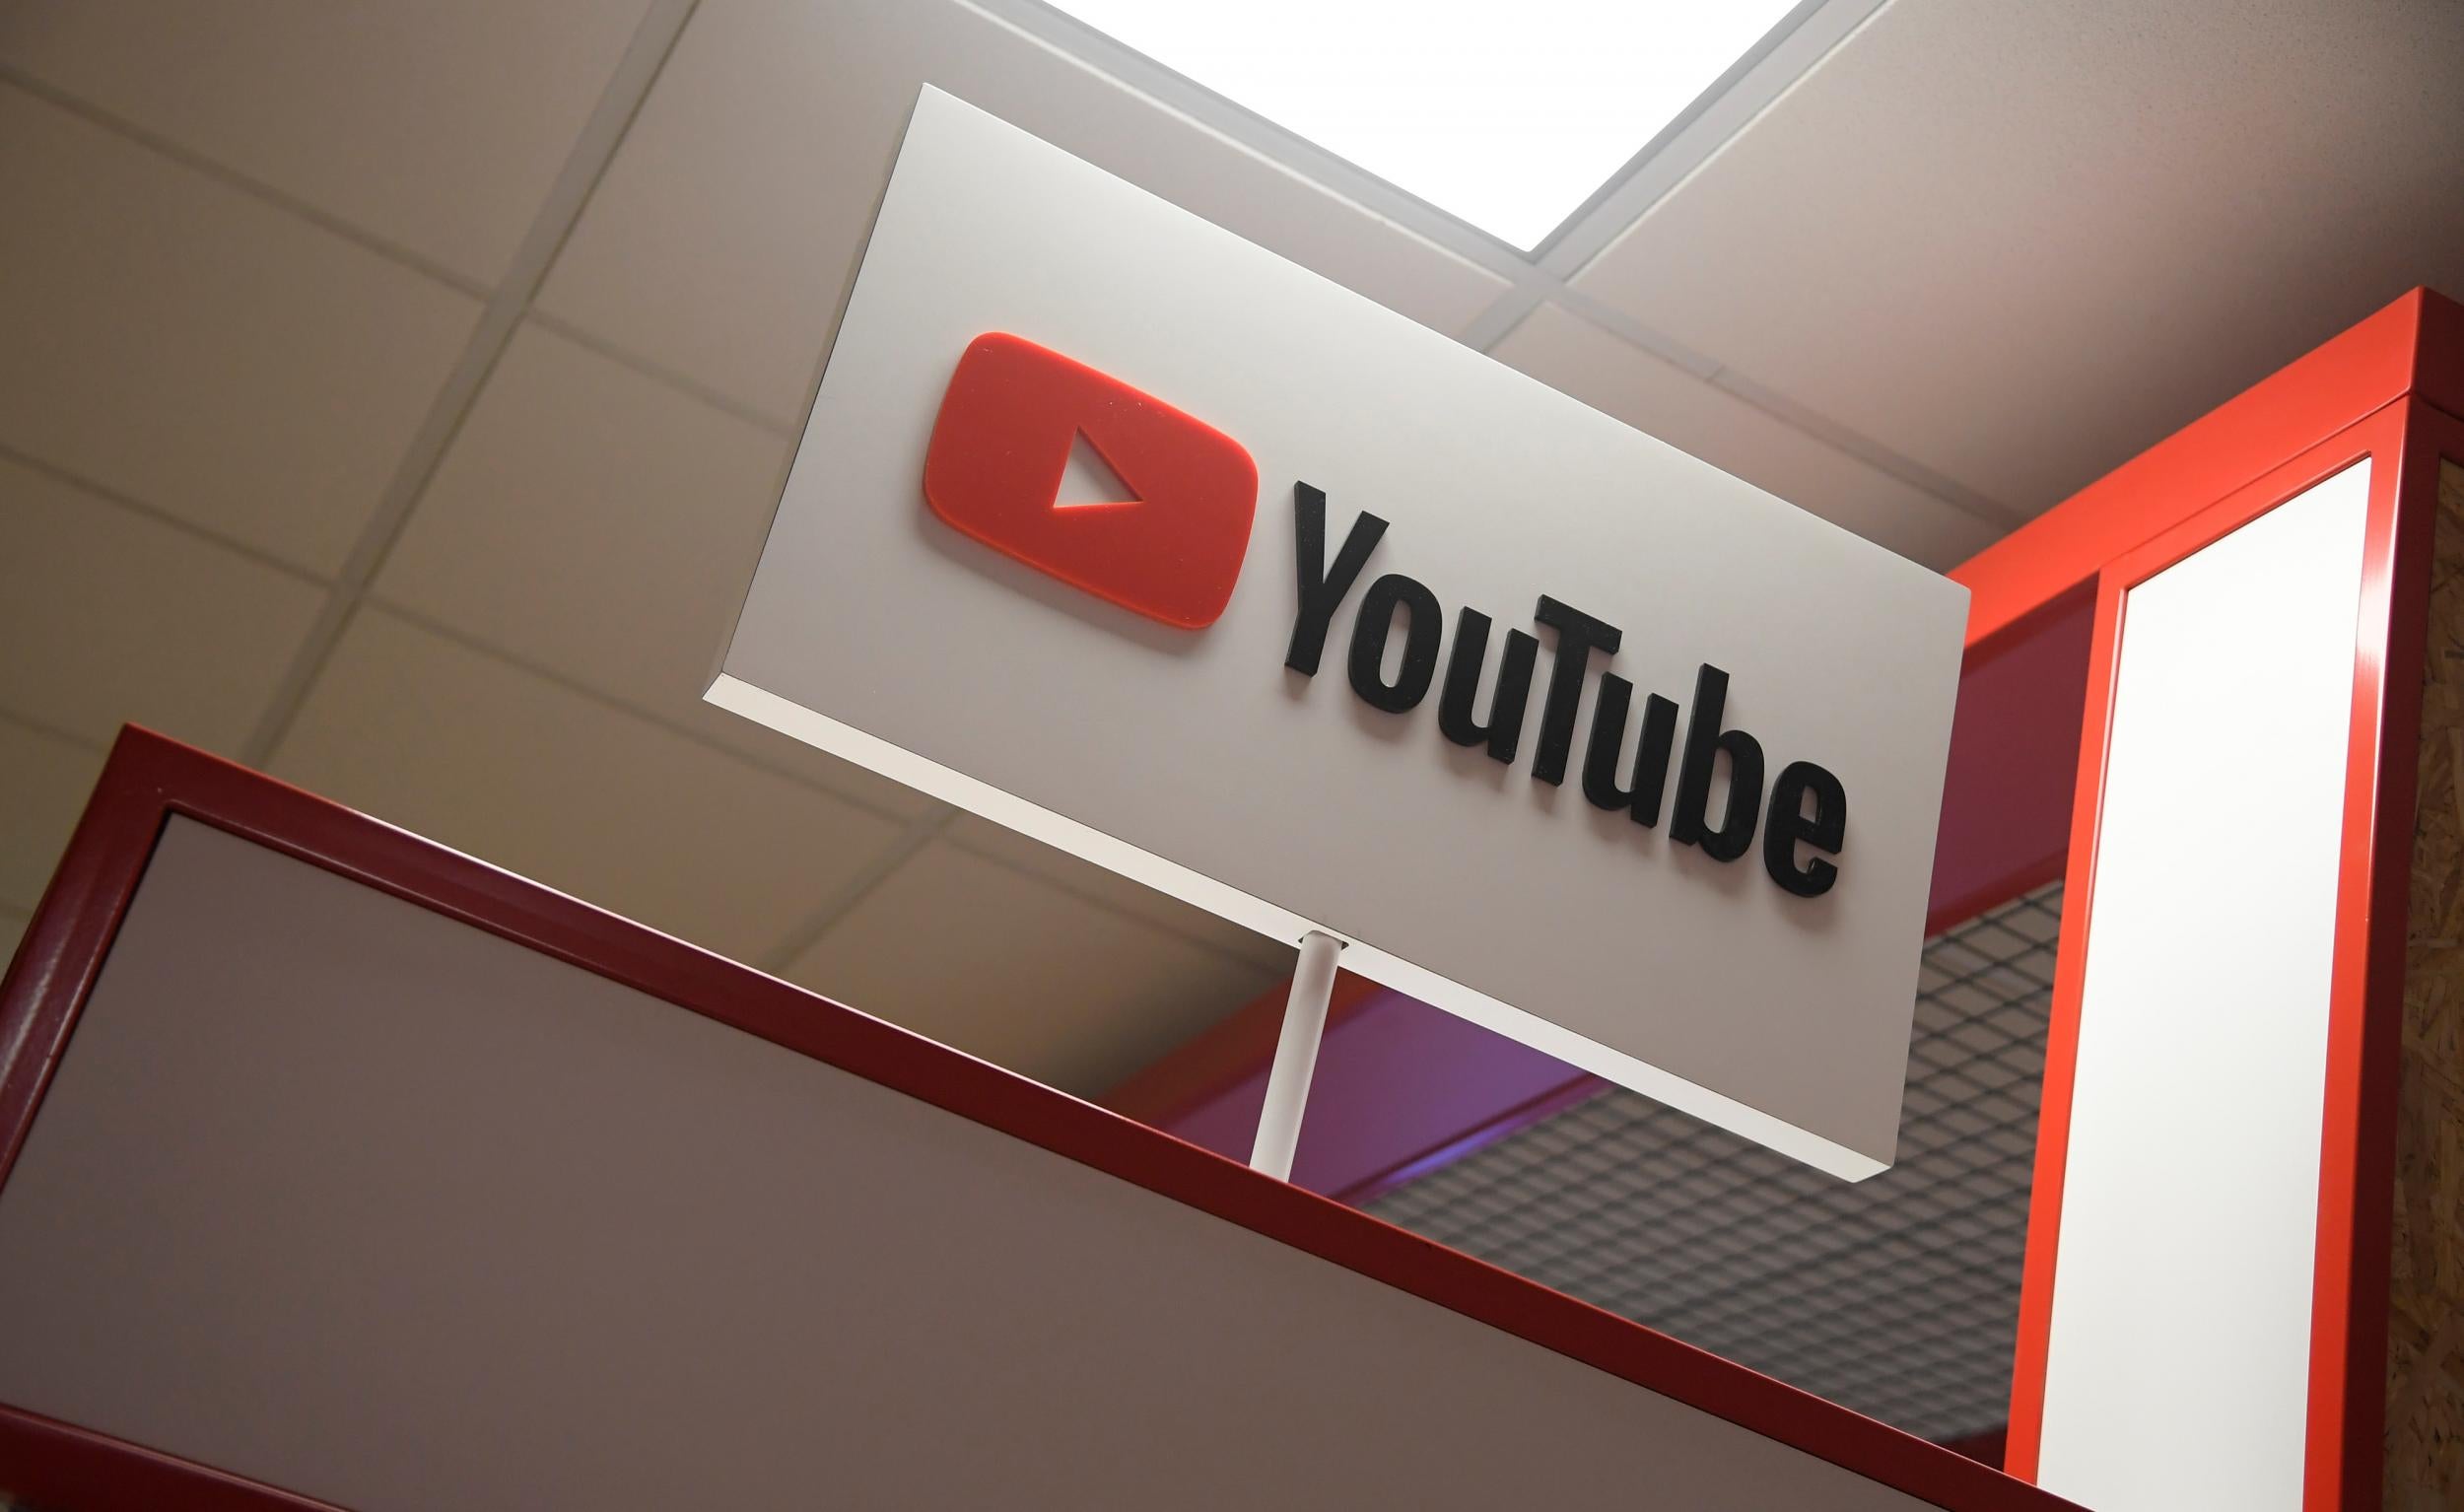 YouTube has reached out to artists to seek their help in promoting the new service